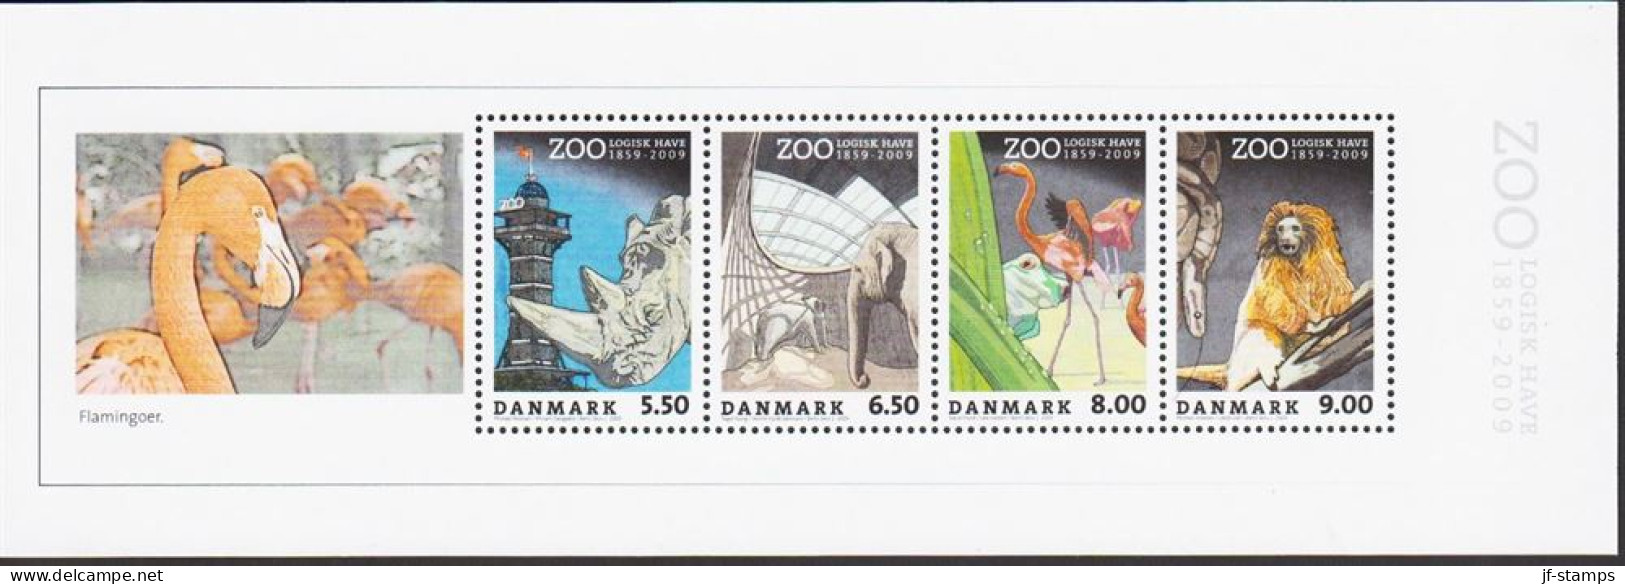 2009. DANMARK. ZOOLOGISK HAVE Complete Set In One Small Sheet Never Hinged.  (Michel 1530-1533) - JF544440 - Unused Stamps